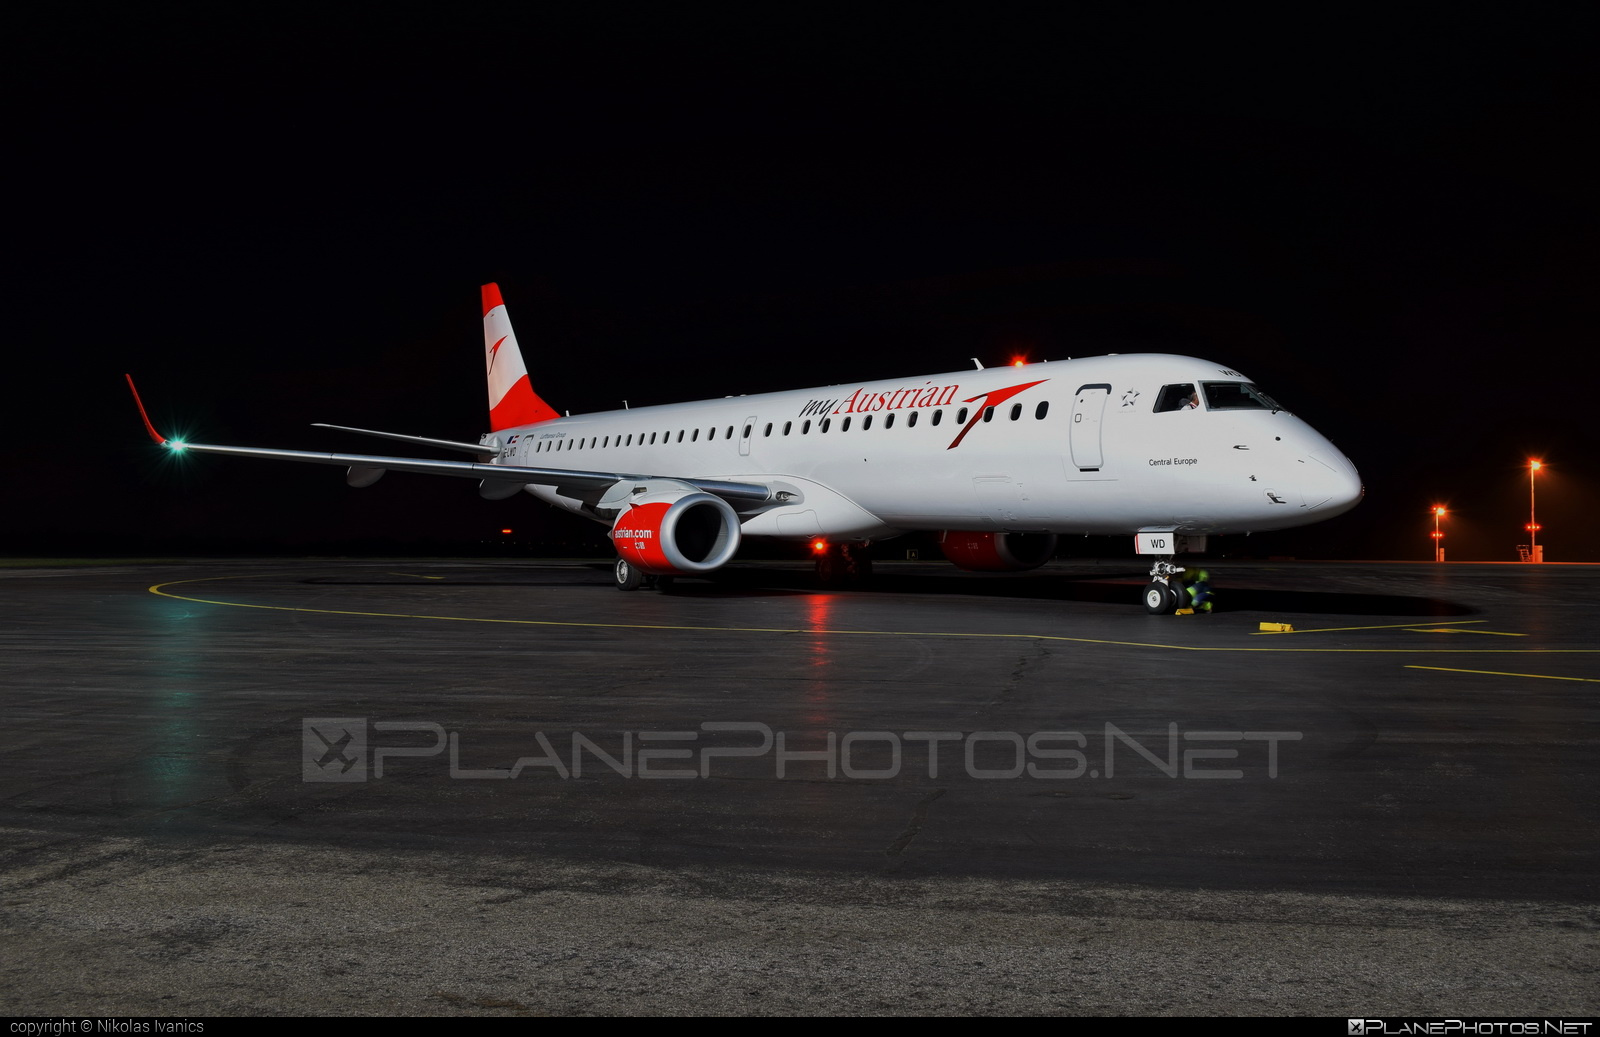 Embraer E195LR (ERJ-190-200LR) - OE-LWD operated by Austrian Airlines #austrian #austrianAirlines #e190 #e190200 #e190200lr #e195lr #embraer #embraer190200lr #embraer195 #embraer195lr